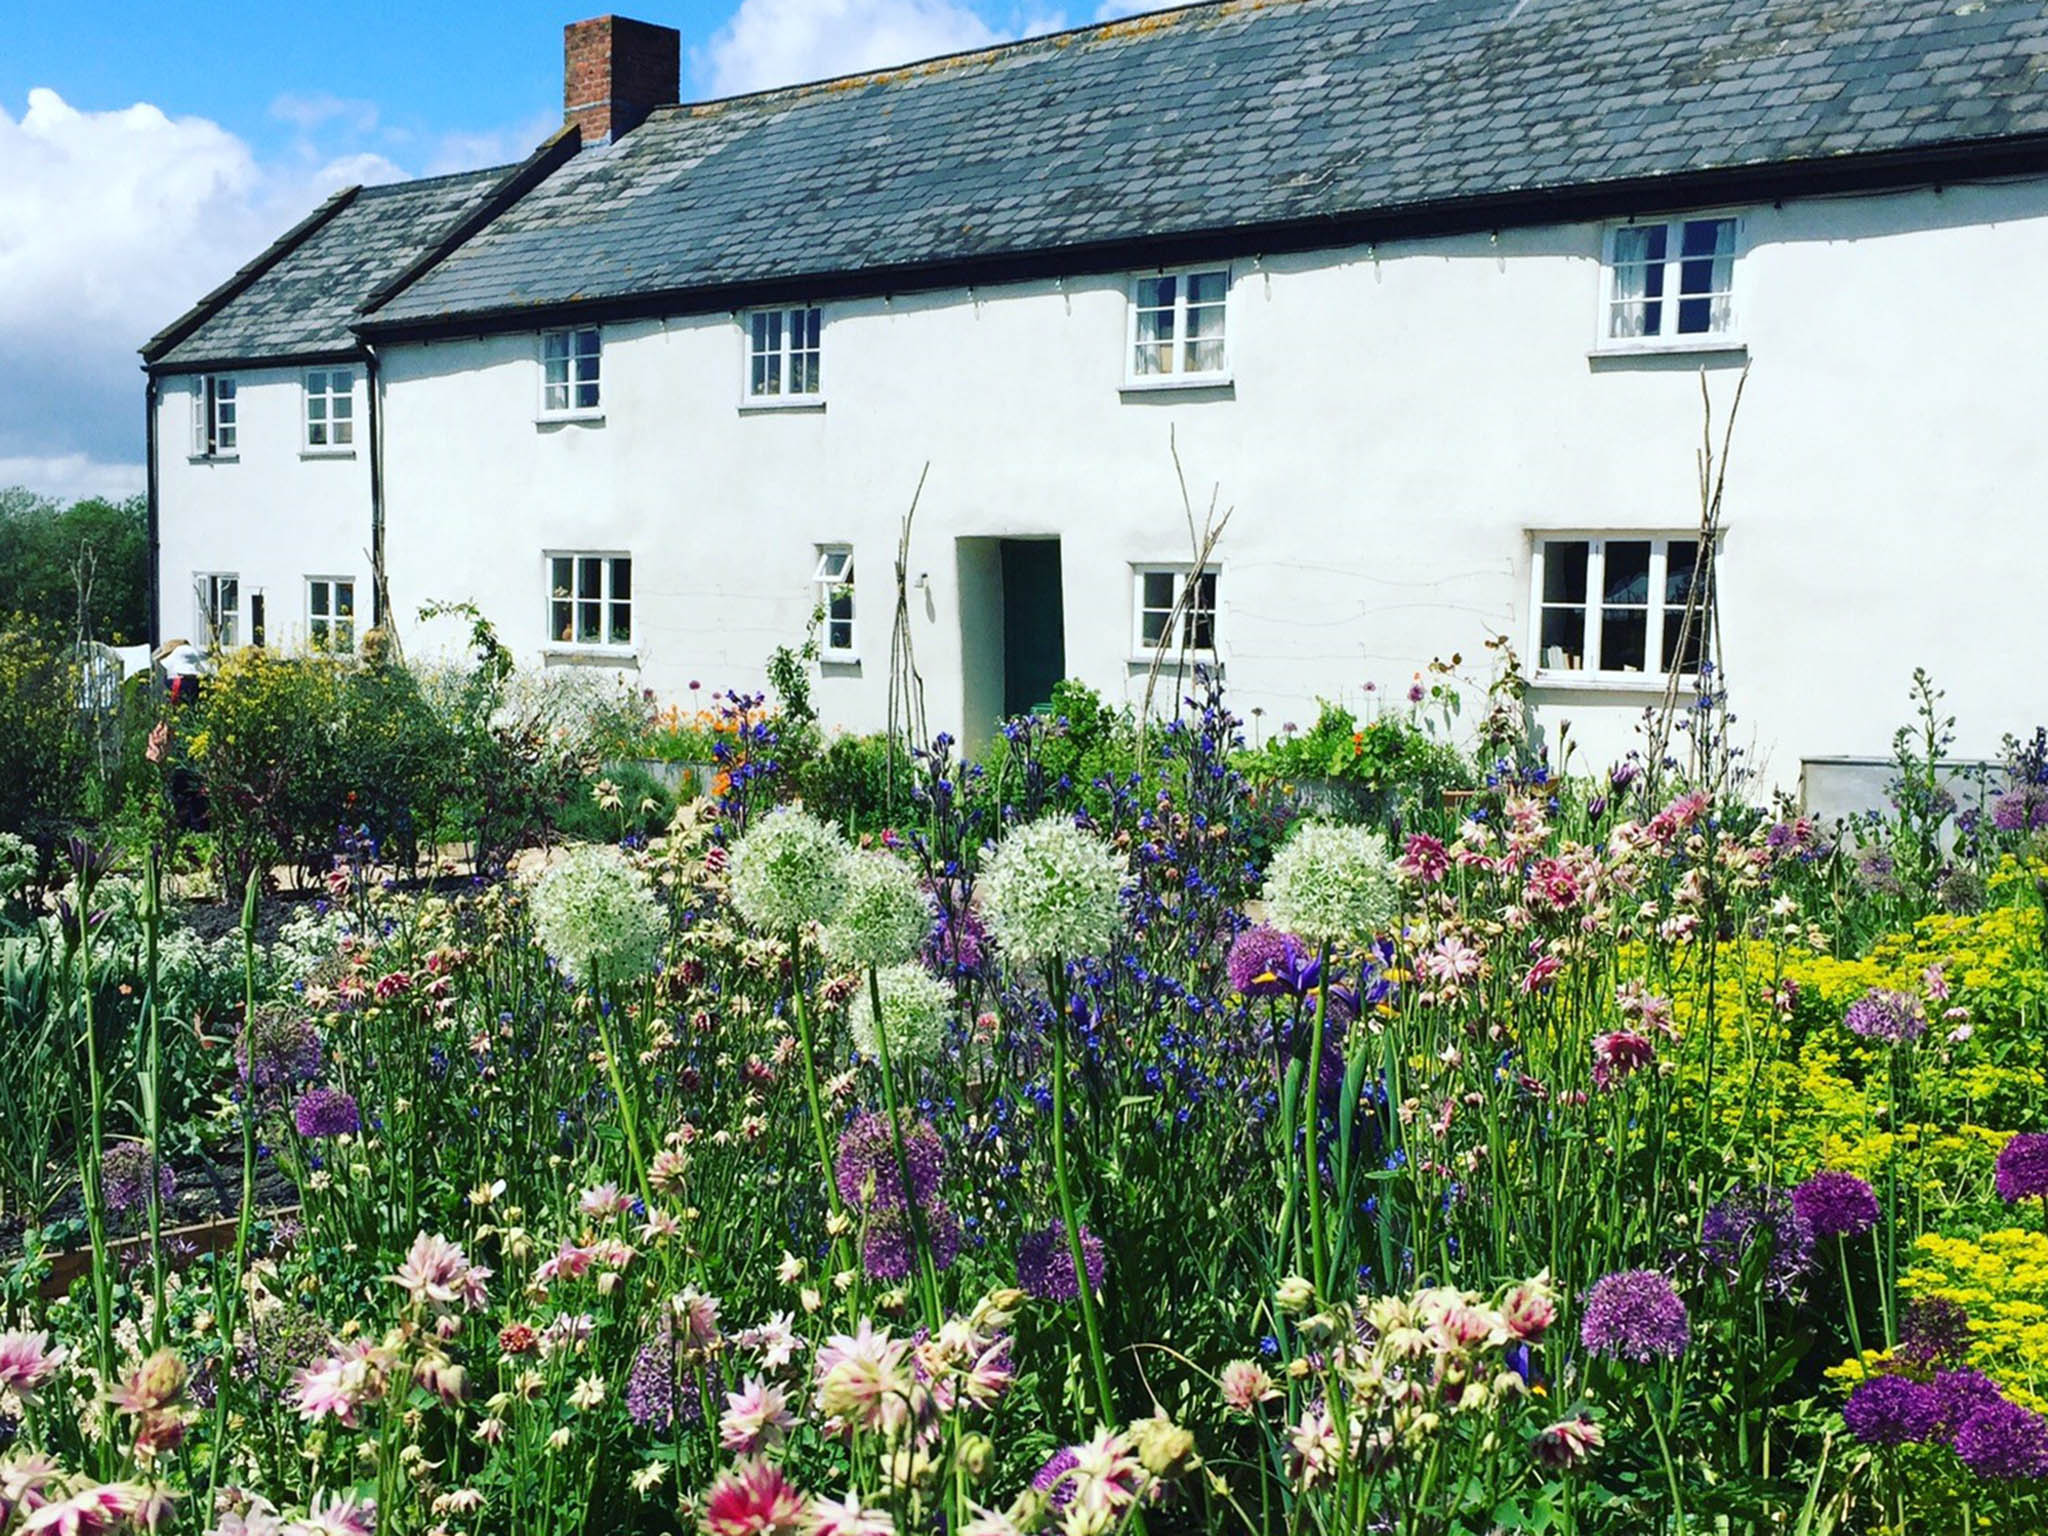 Set on the border between Devon and Dorset, River Cottage HQ is all about getting back to basics and reconnecting with food